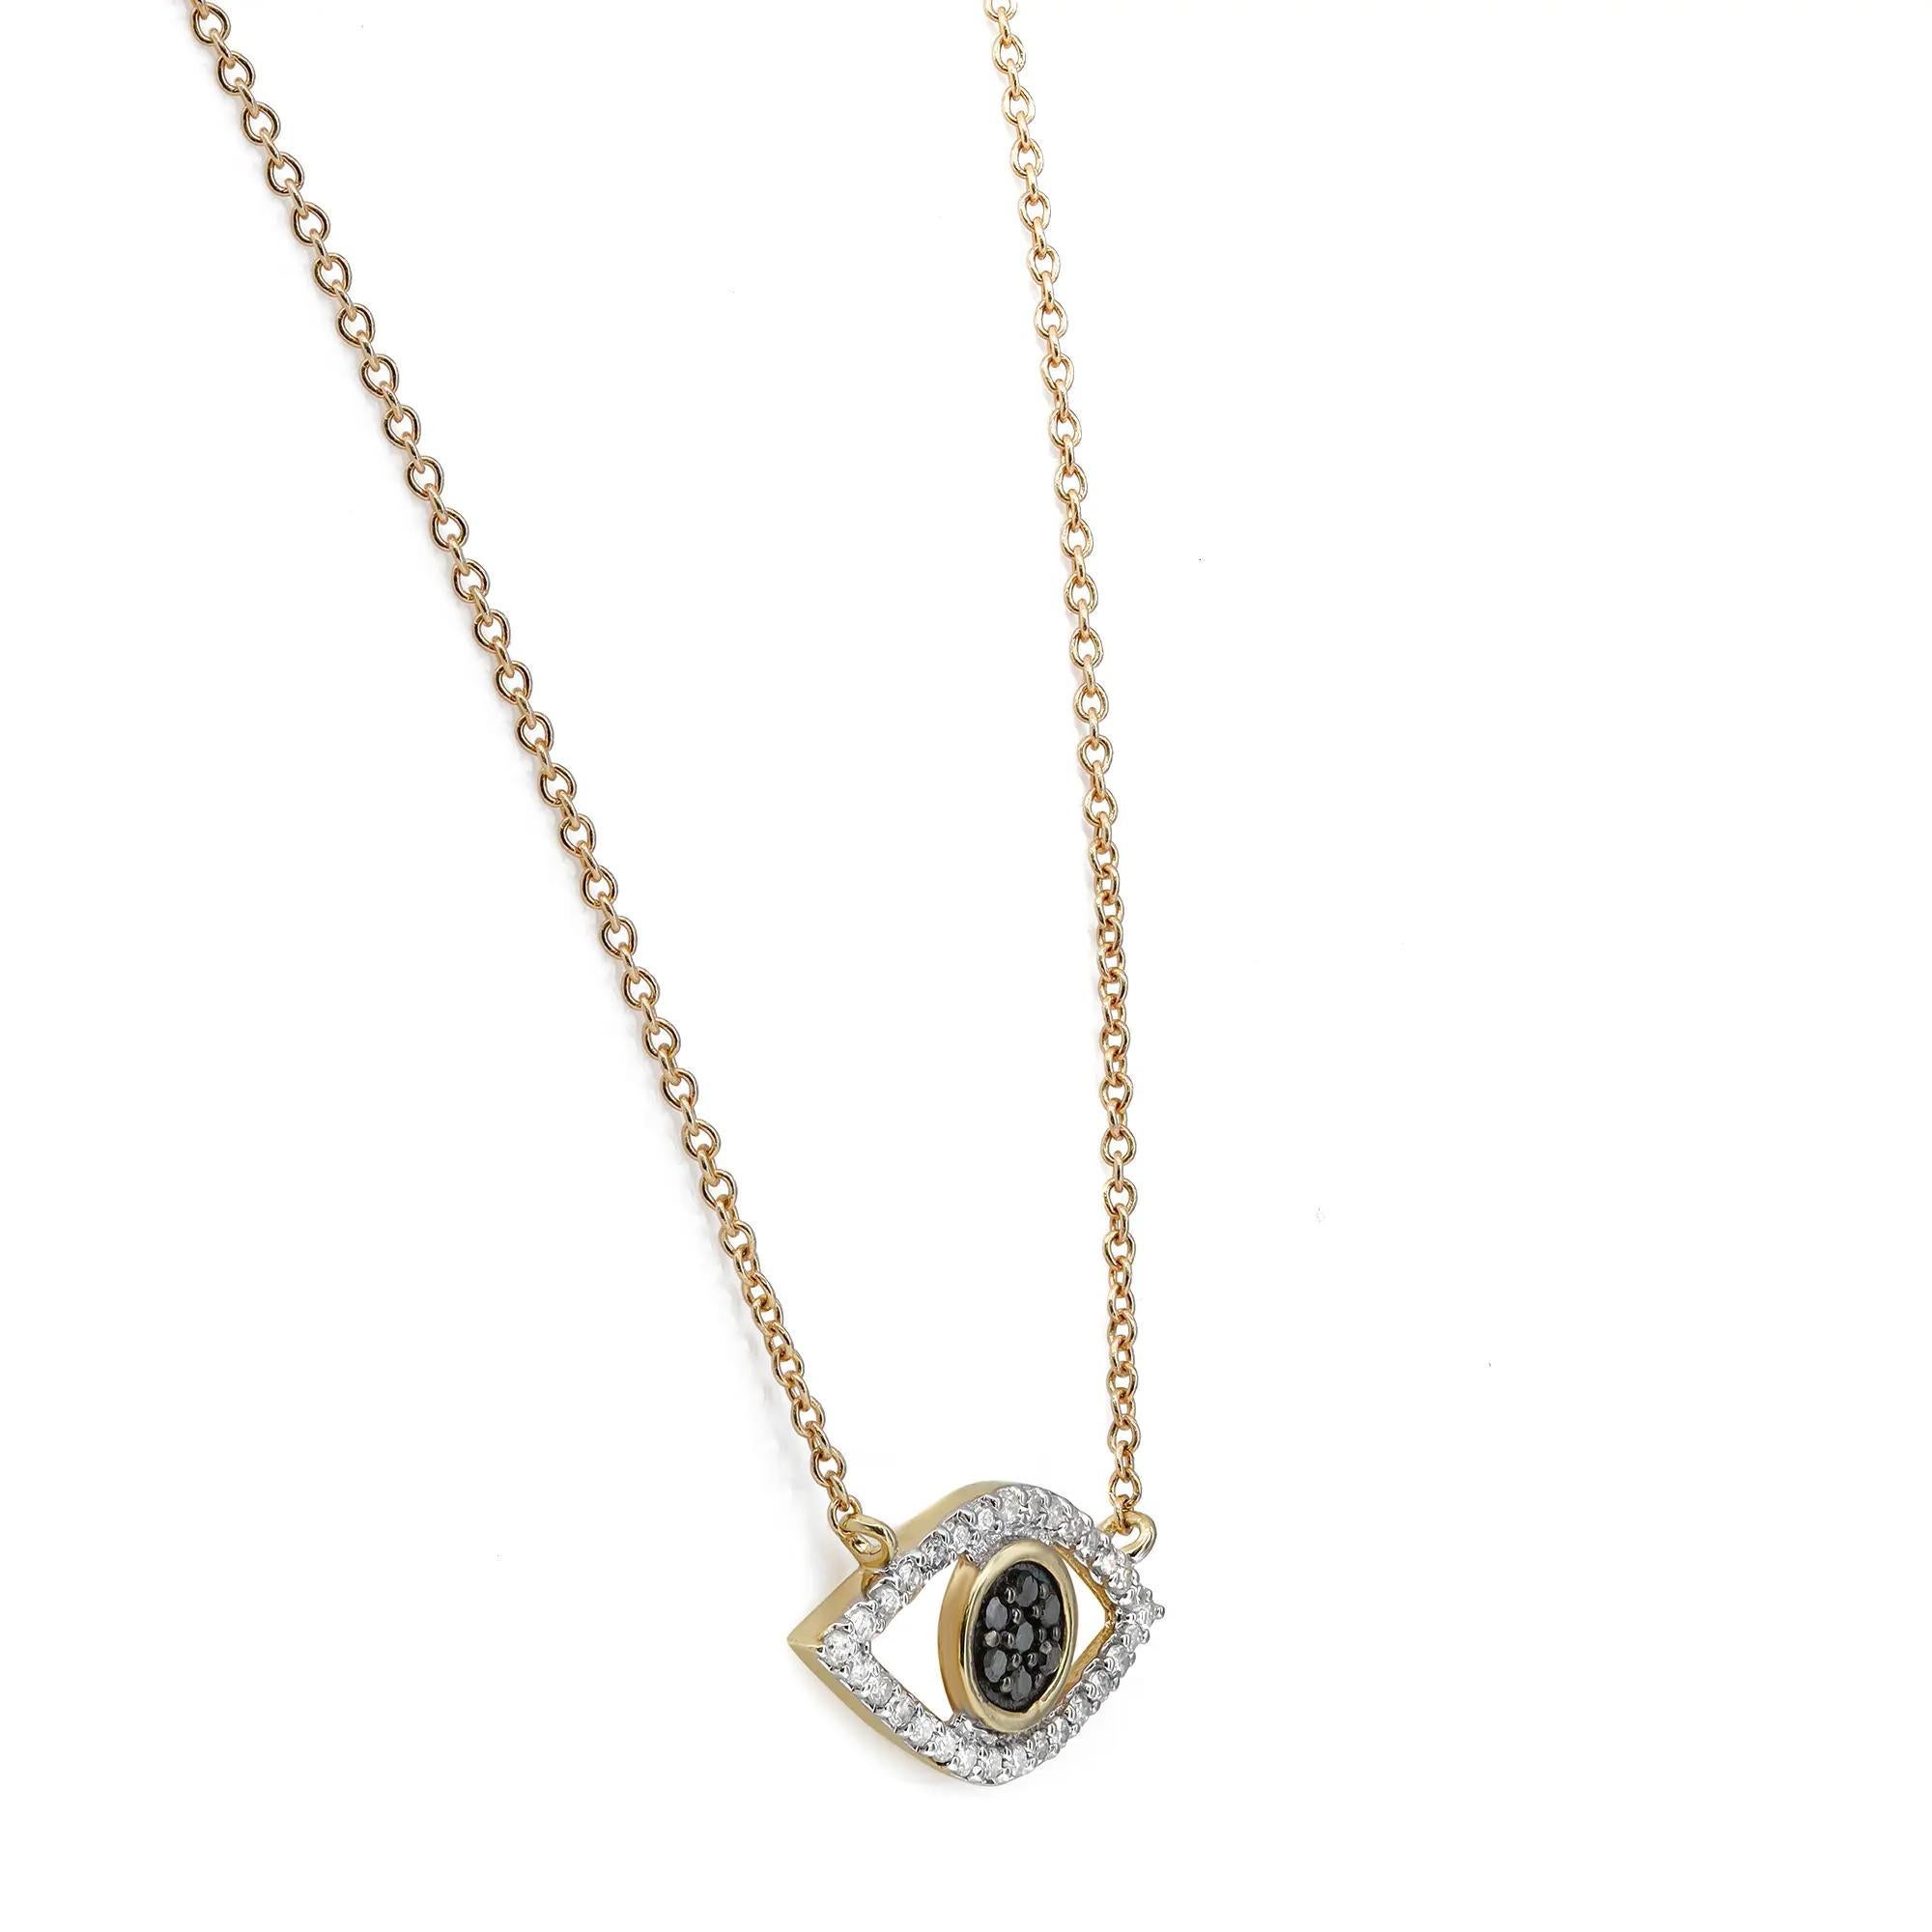 Round Cut Evil Eye Pave Diamond Pendant Necklace In 14K Yellow Gold 0.18Cttw For Sale